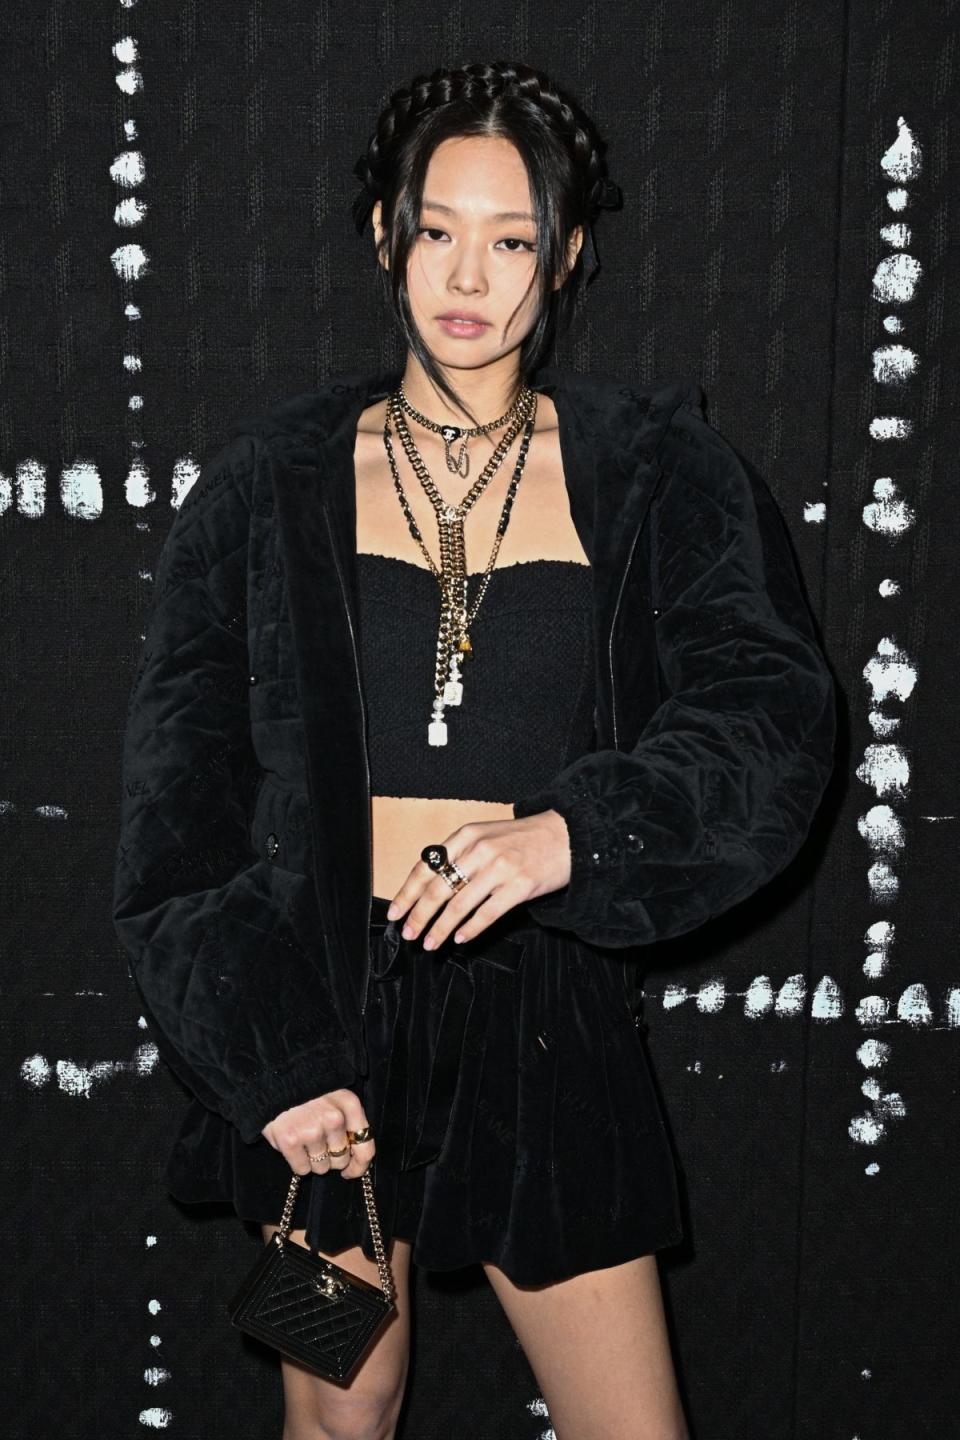 PARIS, FRANCE - MARCH 08: (EDITORIAL USE ONLY - For Non-Editorial use please seek approval from Fashion House) Kim Jennie attends the Chanel Womenswear Fall/Winter 2022/2023 show as part of Paris Fashion Week on March 08, 2022 in Paris, France. (Photo by Stephane Cardinale - Corbis/Corbis via Getty Images)